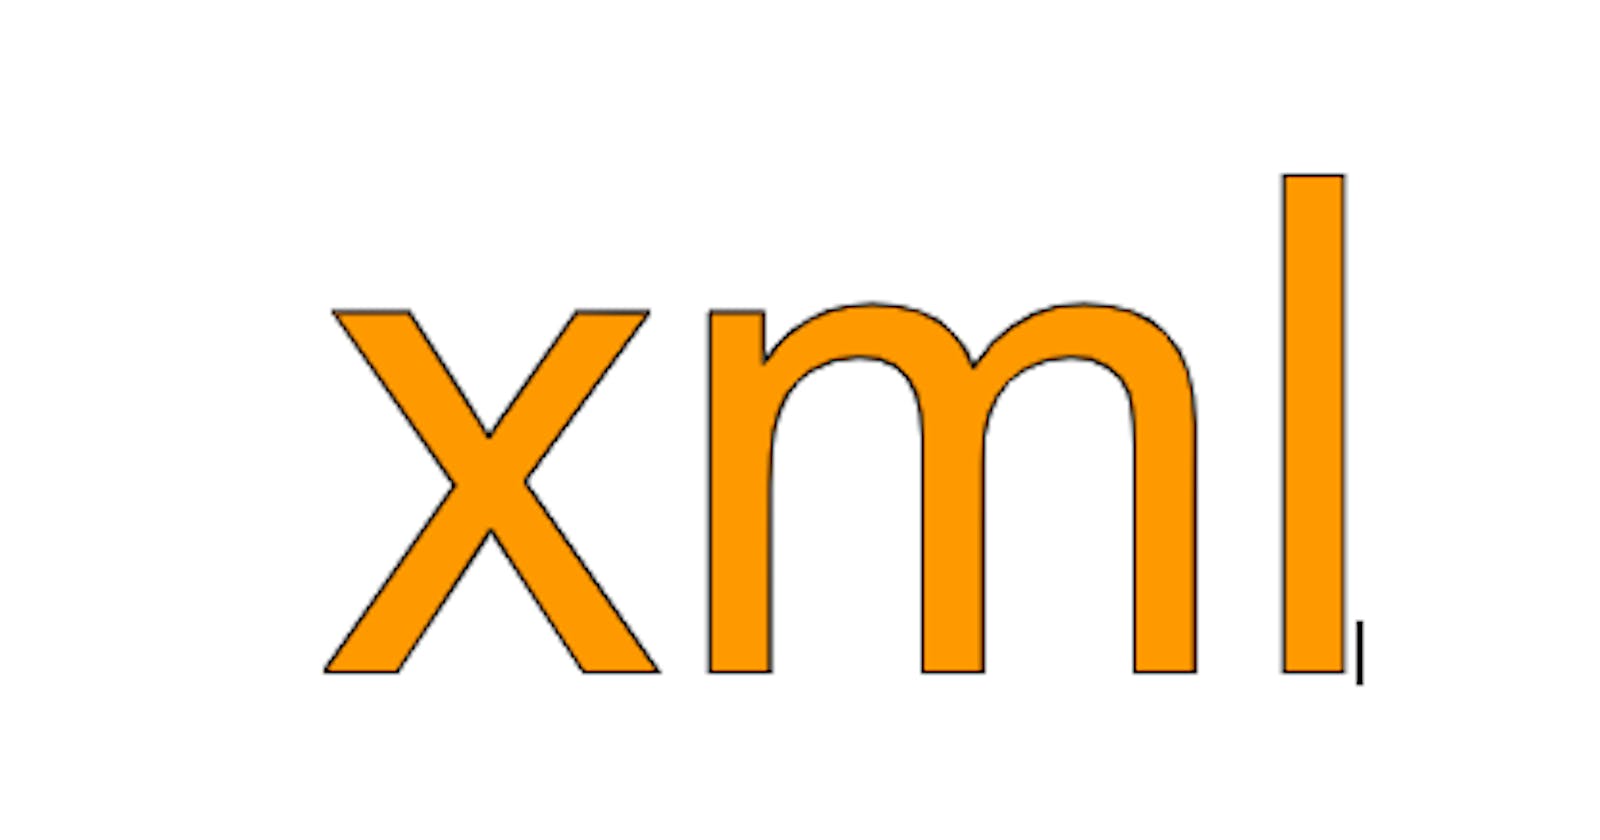 How to write a xml file?